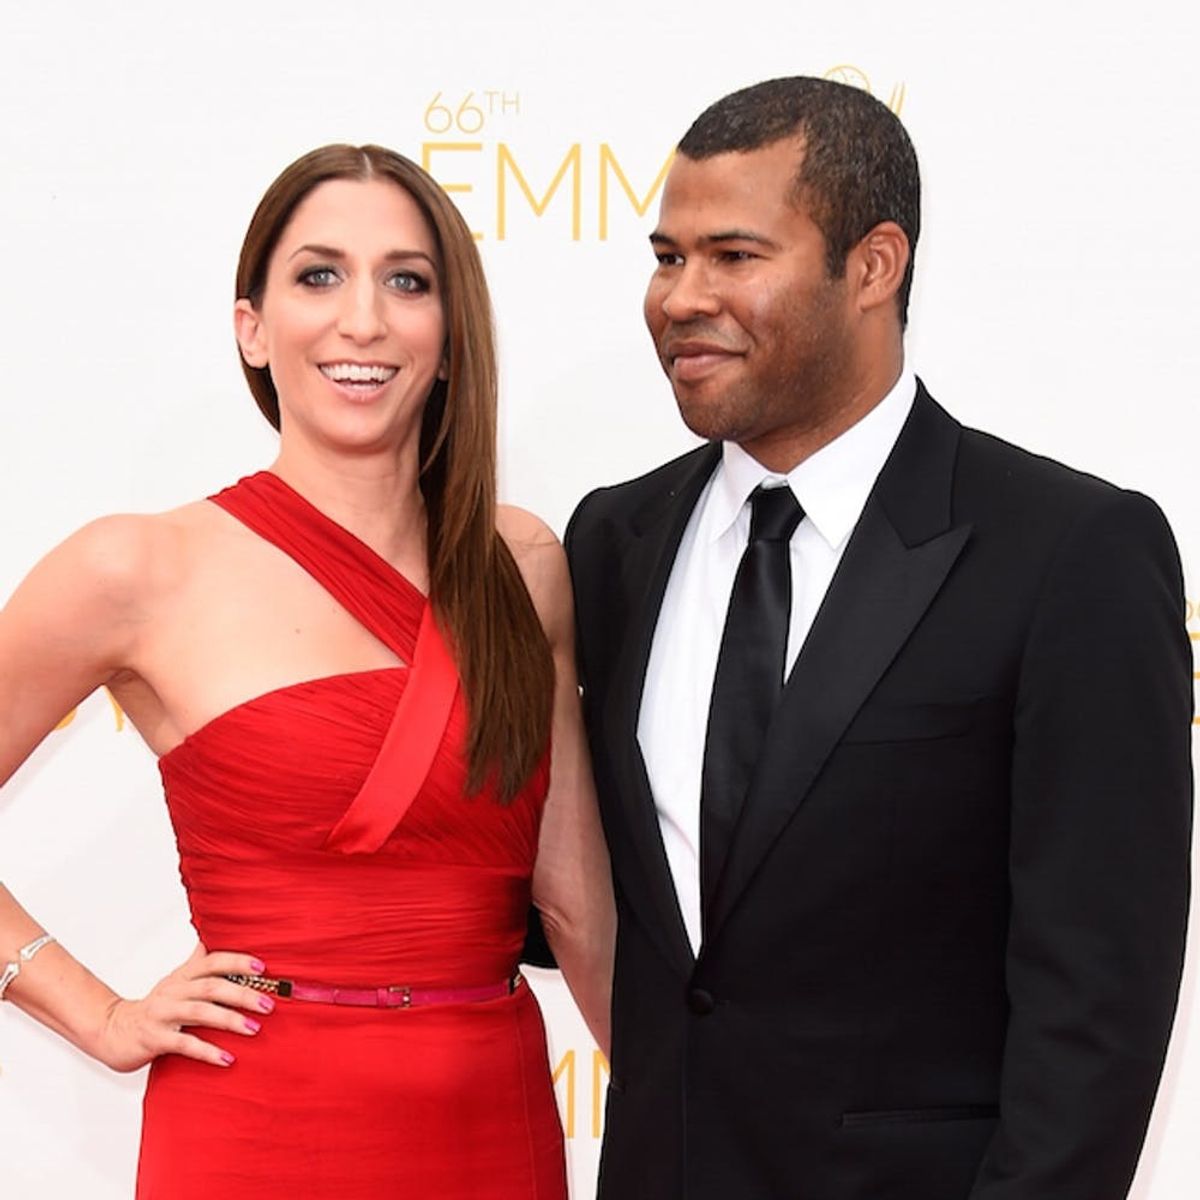 Morning Buzz! Chelsea Peretti and Jordan Peele Announce They Eloped With This Adorable Pic + More